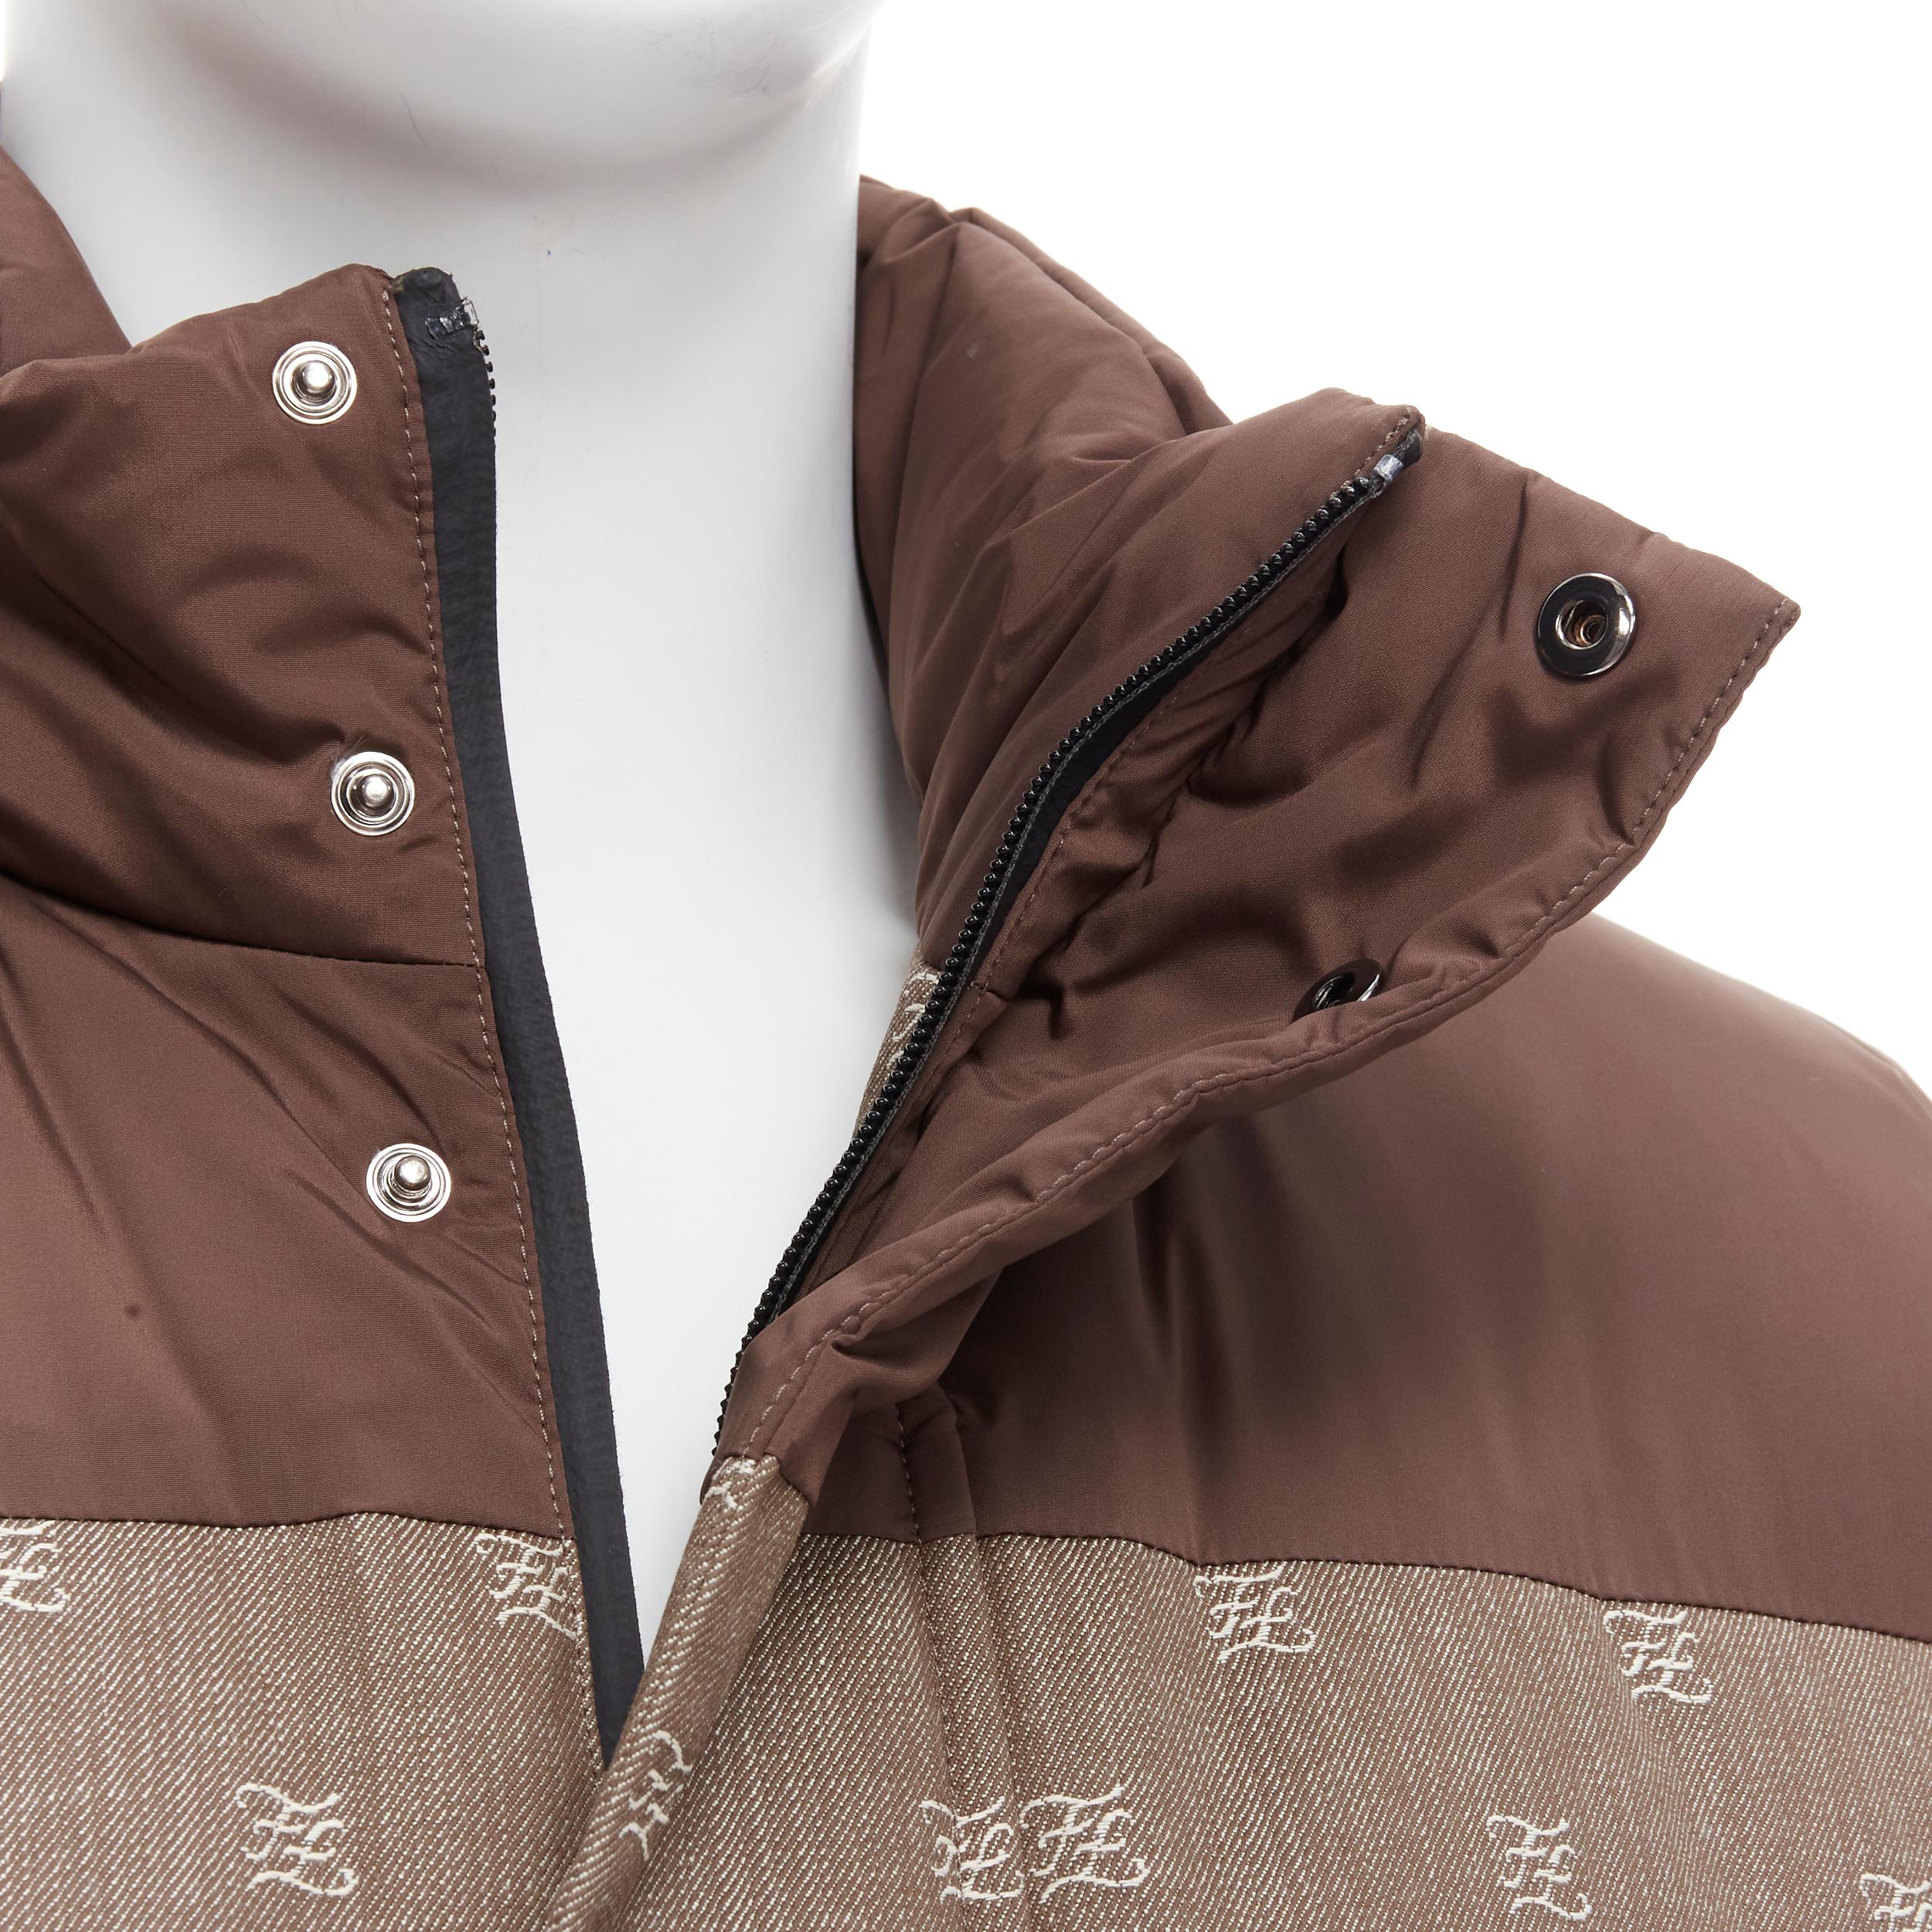 new FENDI script FF Zucca monogram jacquard down puffer vest jacket EU46 S 
Reference: TGAS/B01603 
Brand: Fendi 
Material: Cotton 
Color: Brown 
Pattern: Solid 
Closure: Zip 
Extra Detail: Goose down padded. Brown nylon at shoulder. Script GG